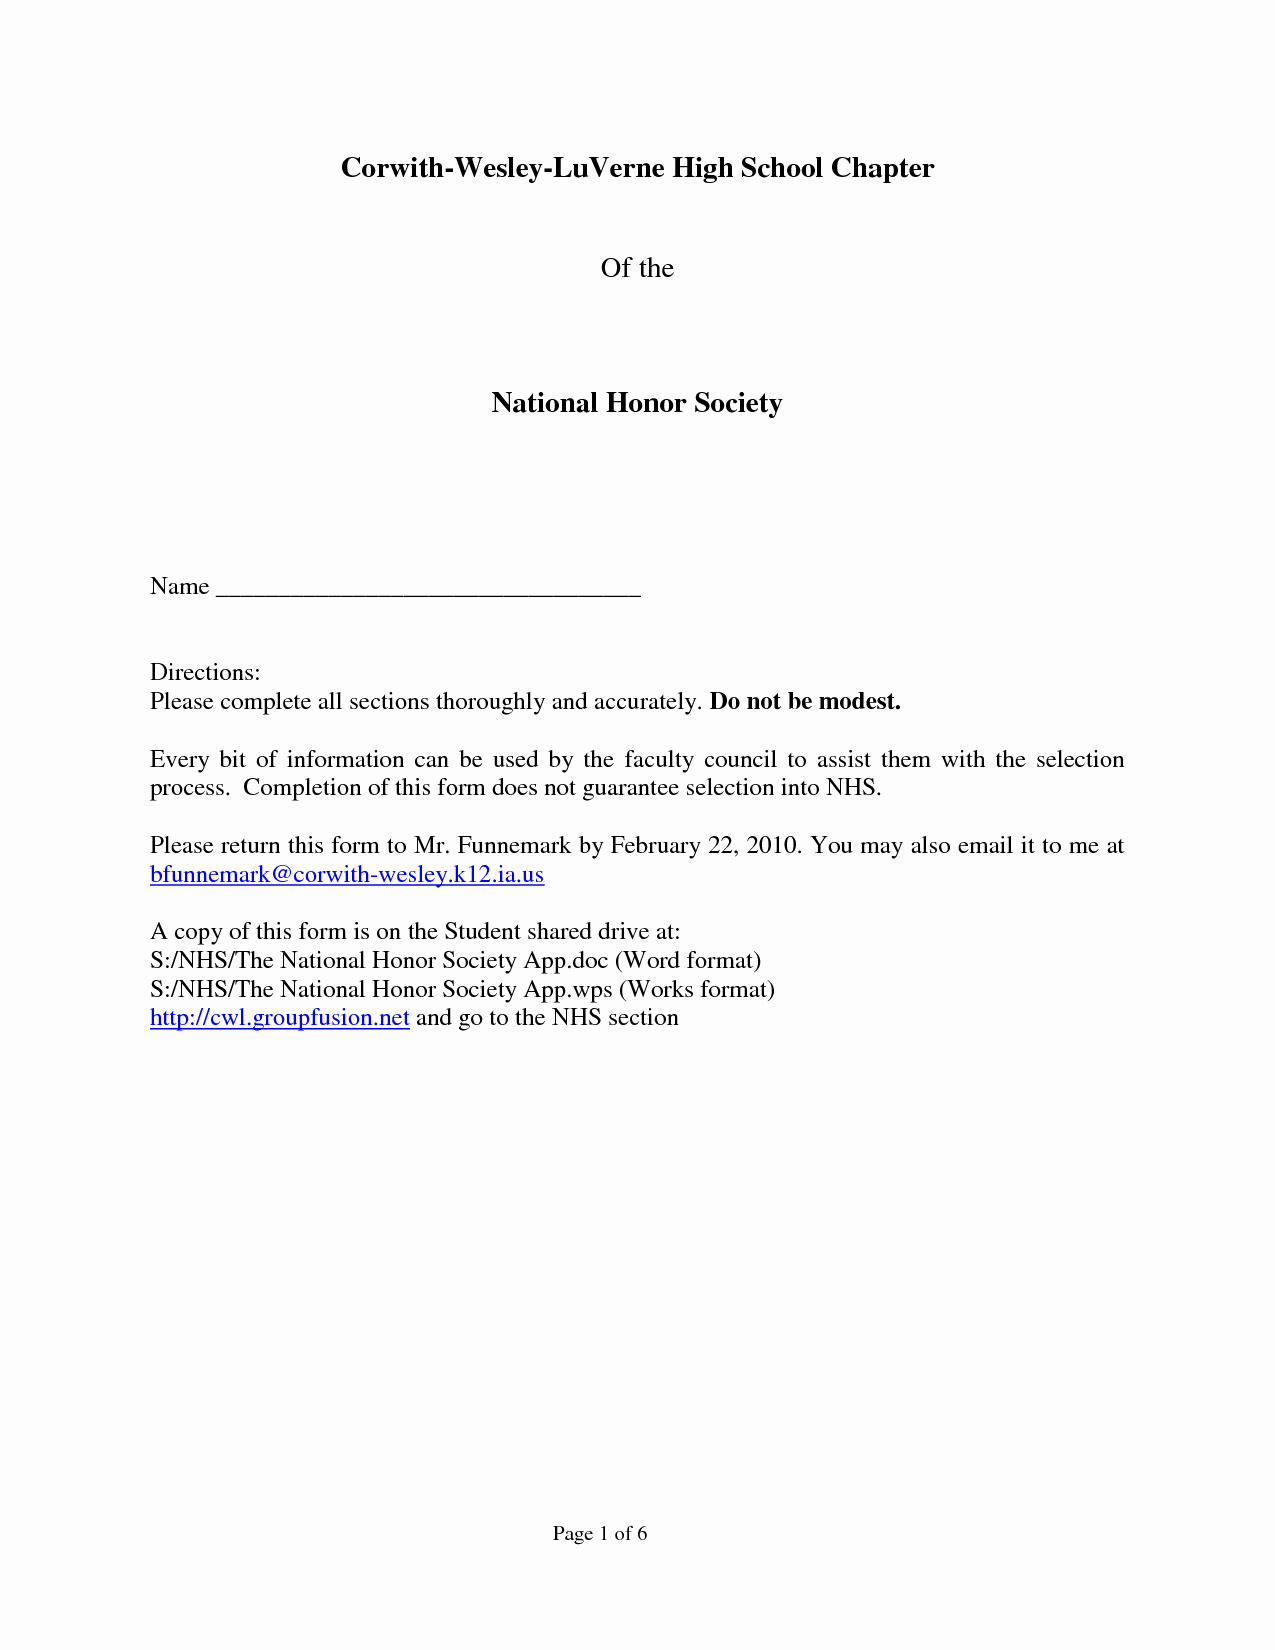 National Honor society Recommendation Letter Awesome Sample Re Mendation Letter for National Honor society